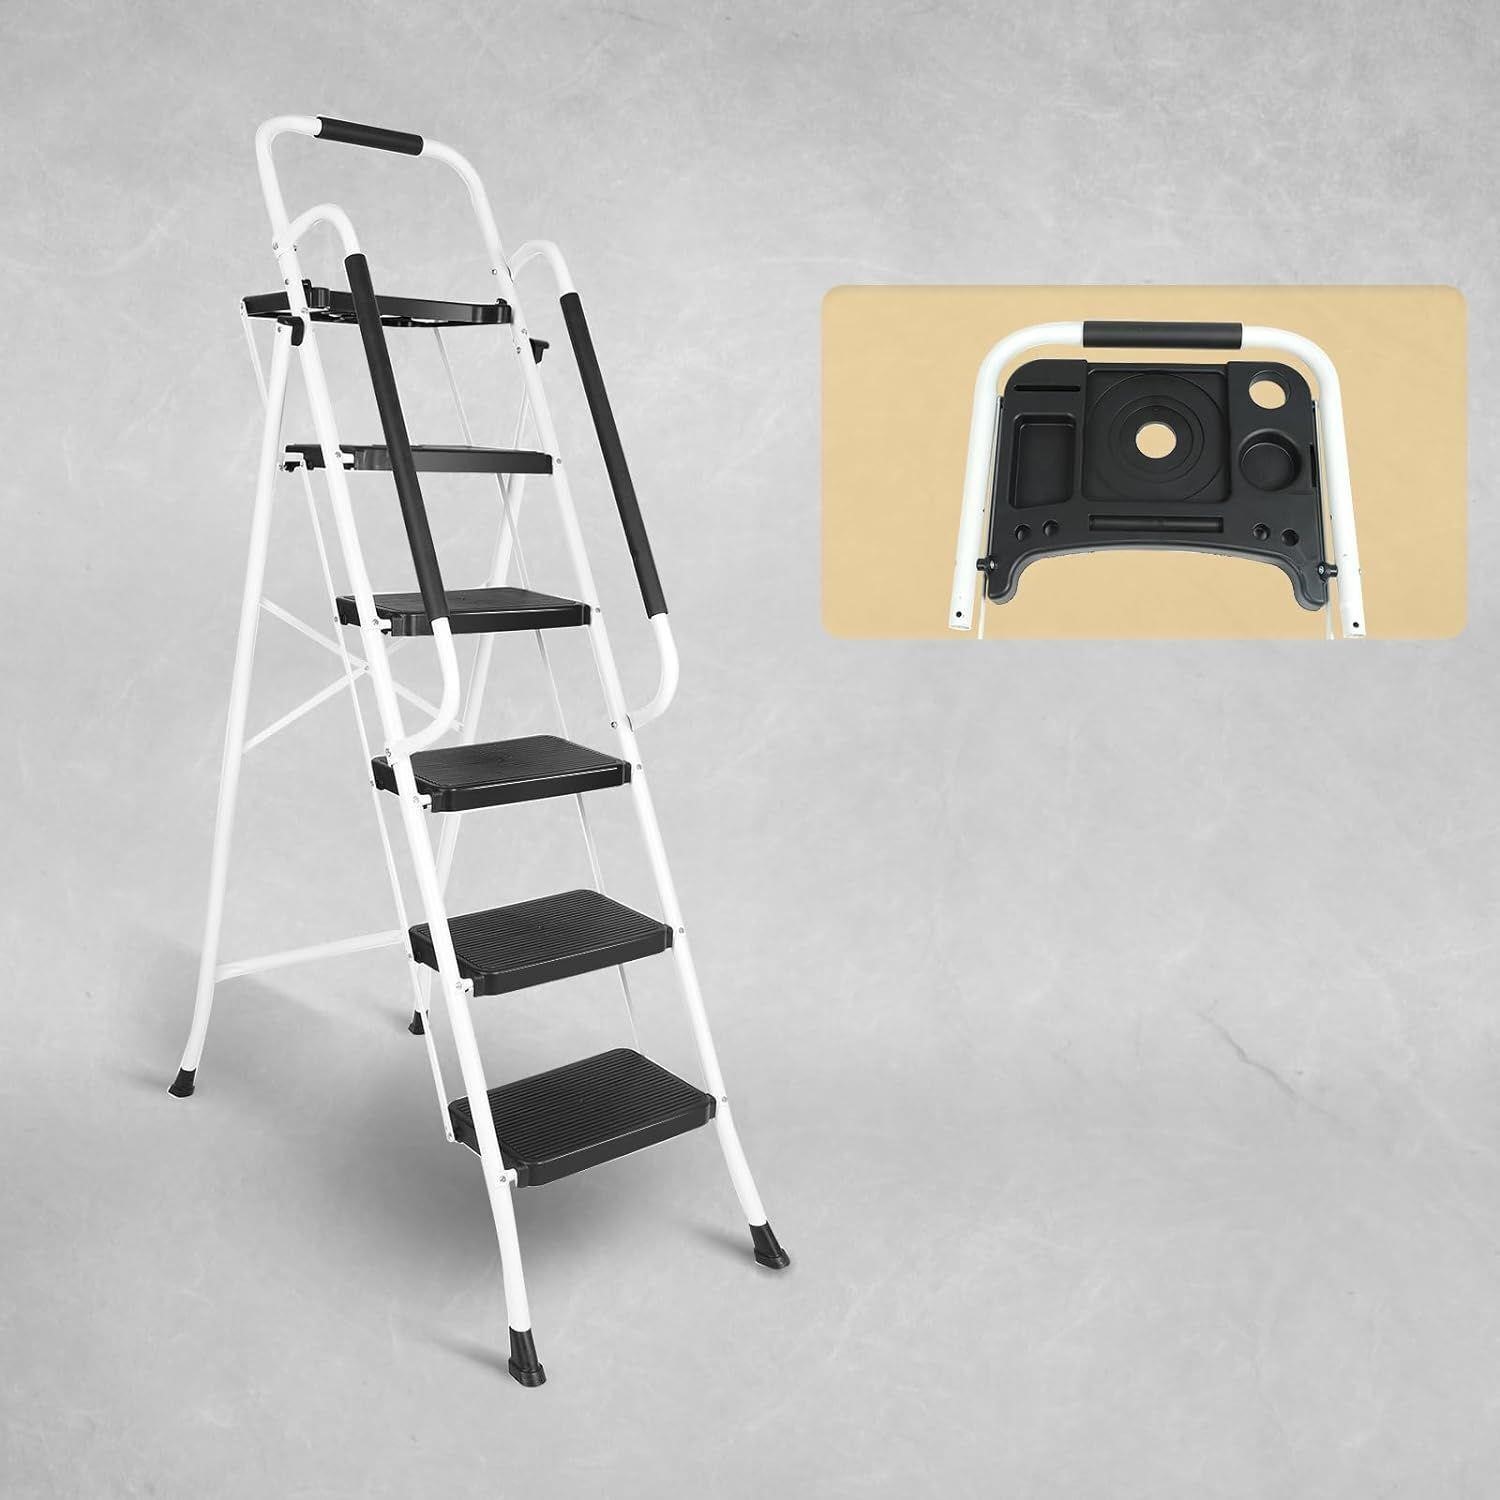 5 Step Ladder with Handrails, Folding Step Stool